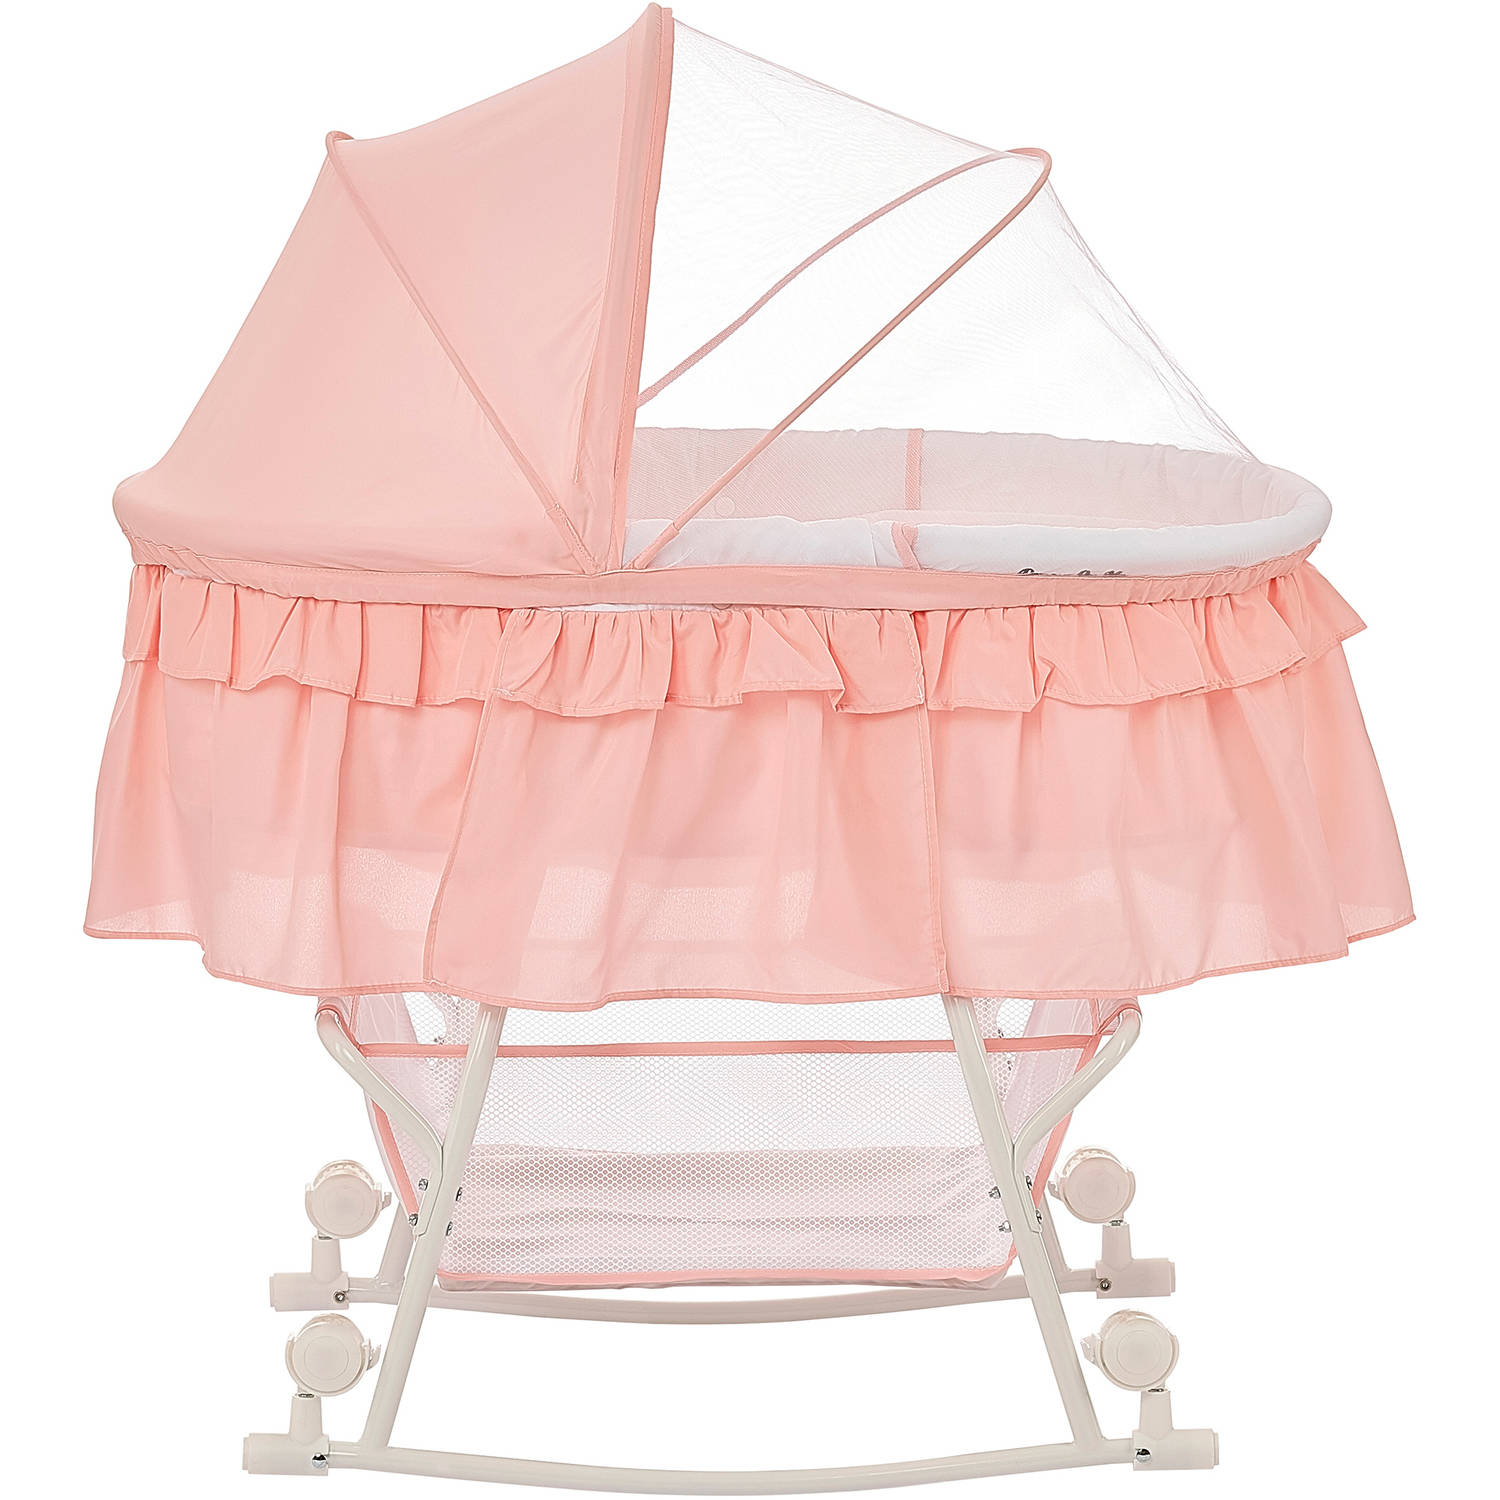 Dream On Me Lacy, Portable 2 in 1 Bassinet and Cradle in Rose Quartz - image 4 of 7